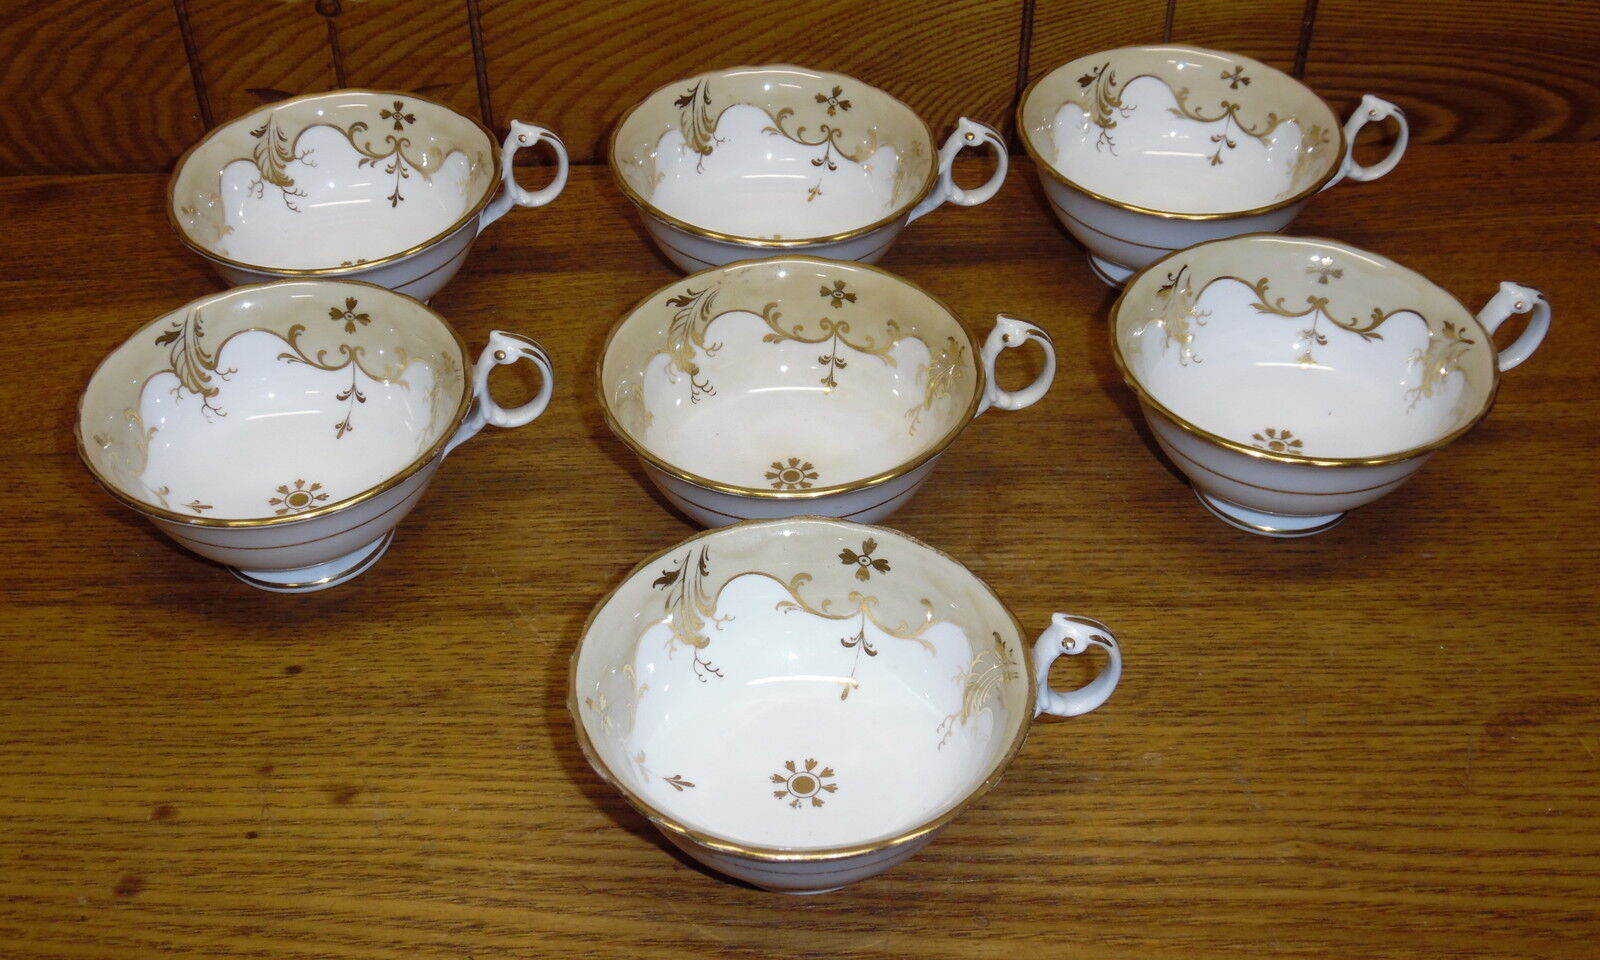 7 Antique Porcelain Cups - Marked w/ Crown - A Couple Hairlines